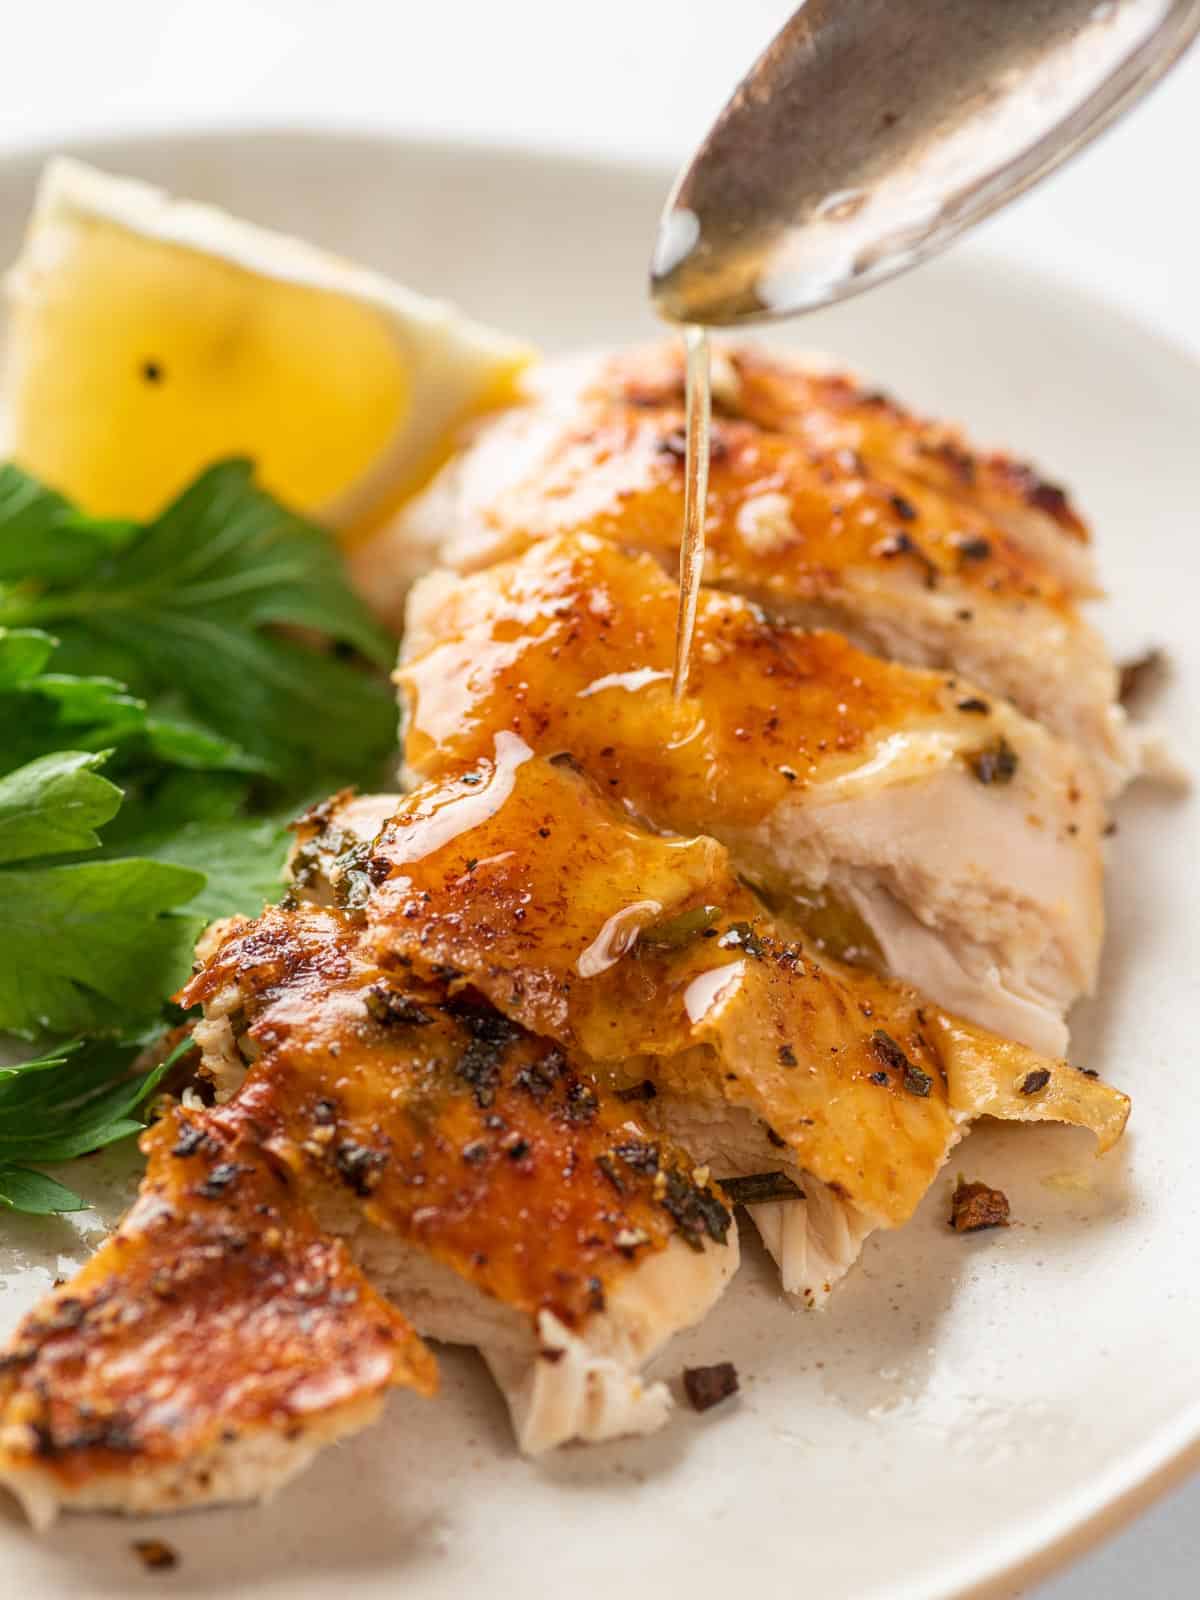 Sliced chicken breast with juices drizzled over top.